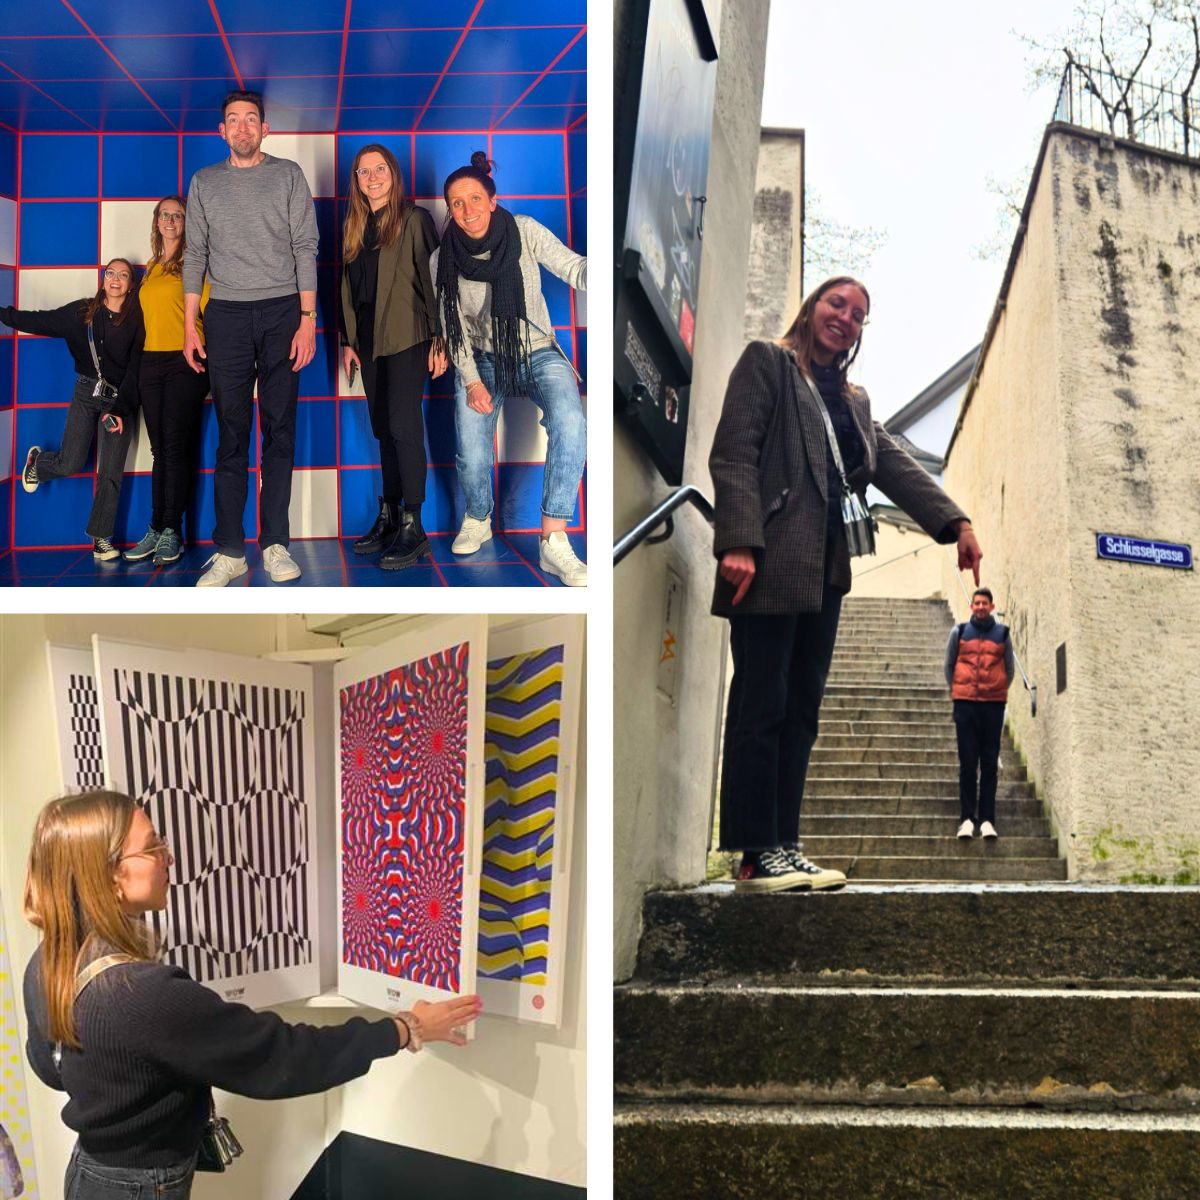 We tested for you: Sensory illusions in- and outside WOW MUSEUM Zurich! ✨ The museum offers 12 immersive rooms, guided tours and exclusive rents. Plus 12 rally routes to explore the city and create optical illusions. #EventProfs #EventPlanning #TeamBuilding #WOW #MeetInZurich